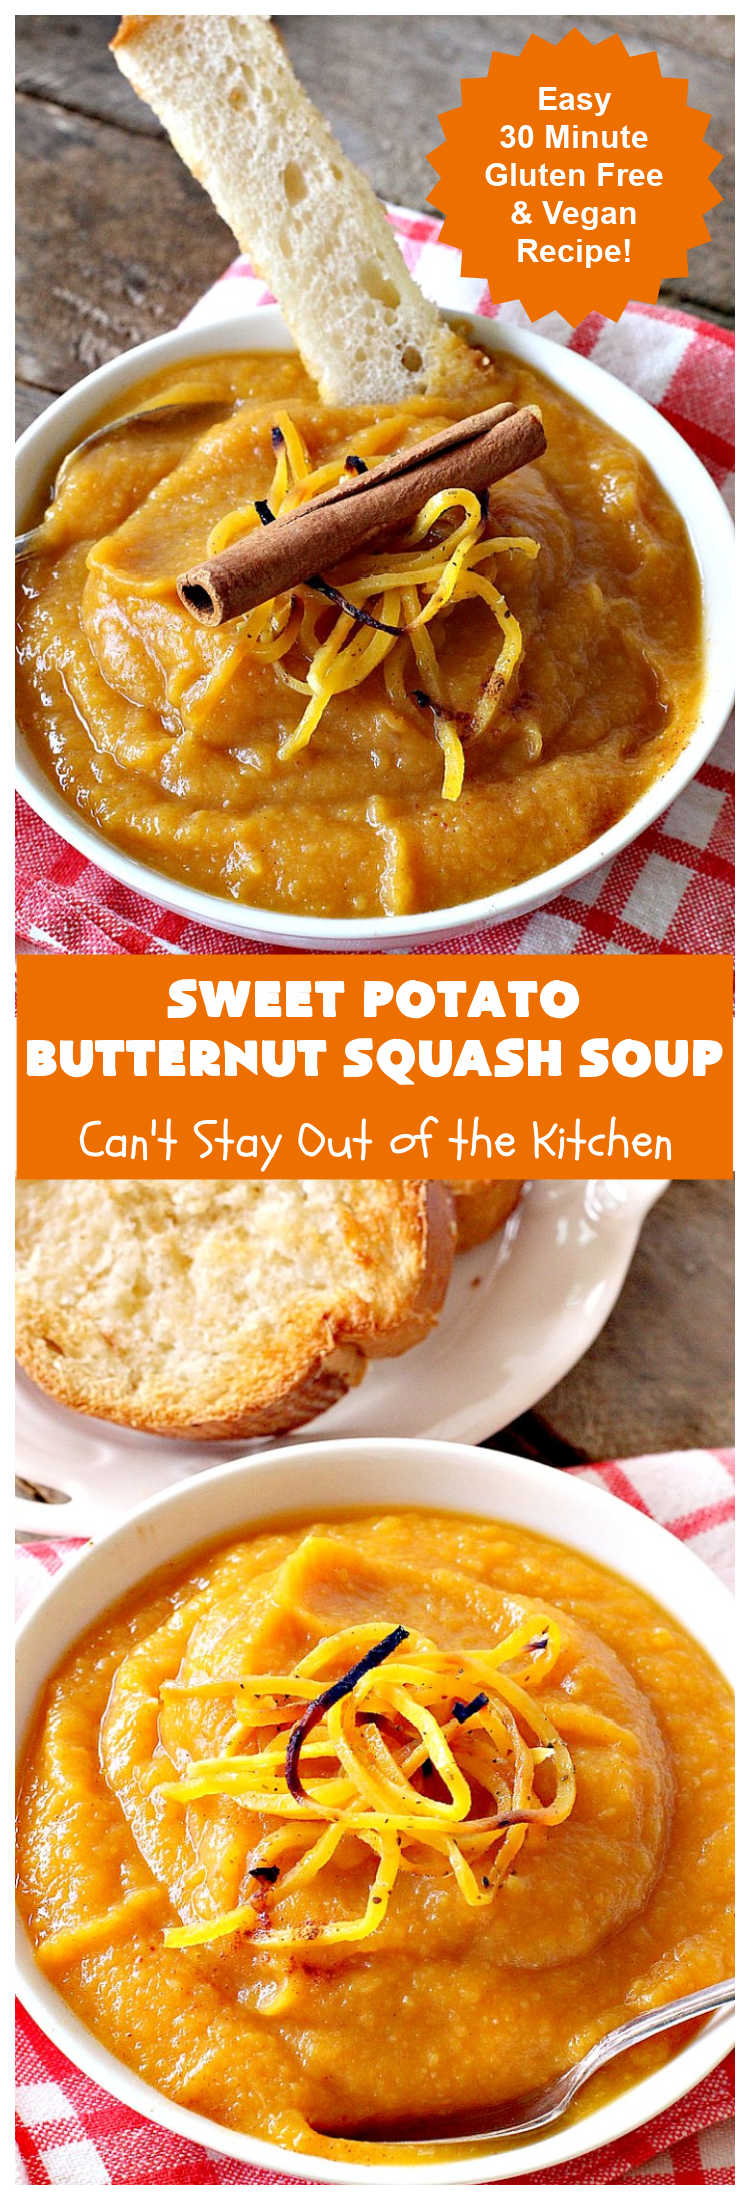 Sweet Potato Butternut Squash Soup | Can't Stay Out of the Kitchen | this delectable 30-minute #soup is amazing comfort food. It's terrific for cold, winter days. It's healthy, #GlutenFree & #vegan. #apples #ButternutSquash #SweetPotatoes #ginger #SweetPotatoSoup #ButternutSquashSoup #SweetPotatoButternutSquashSoup